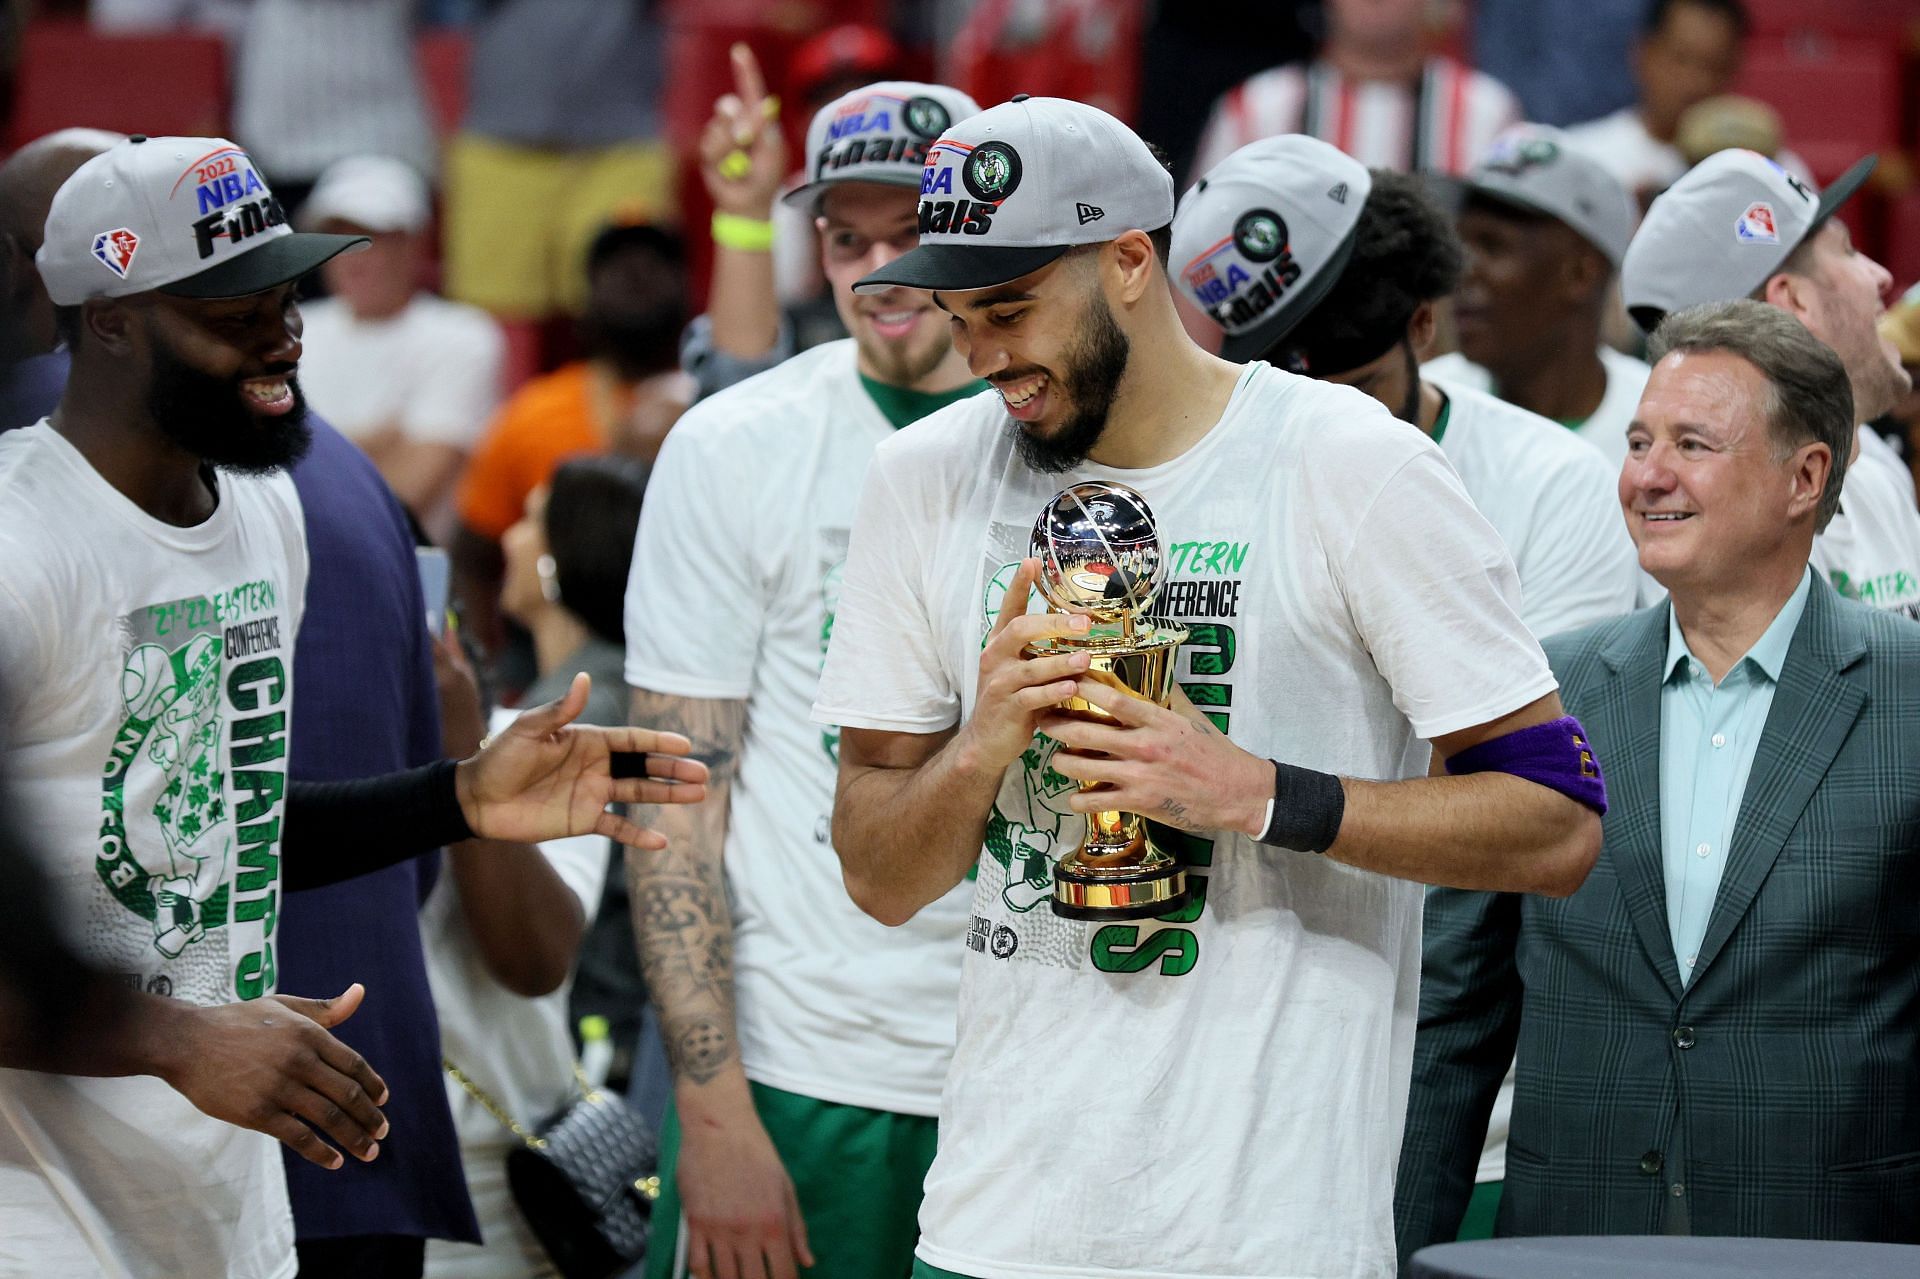 Jayson Tatum receving the Larry Bird Eastern Conference finals MVP trophy after the Boston Celtics&#039; win over the Miami Heat.